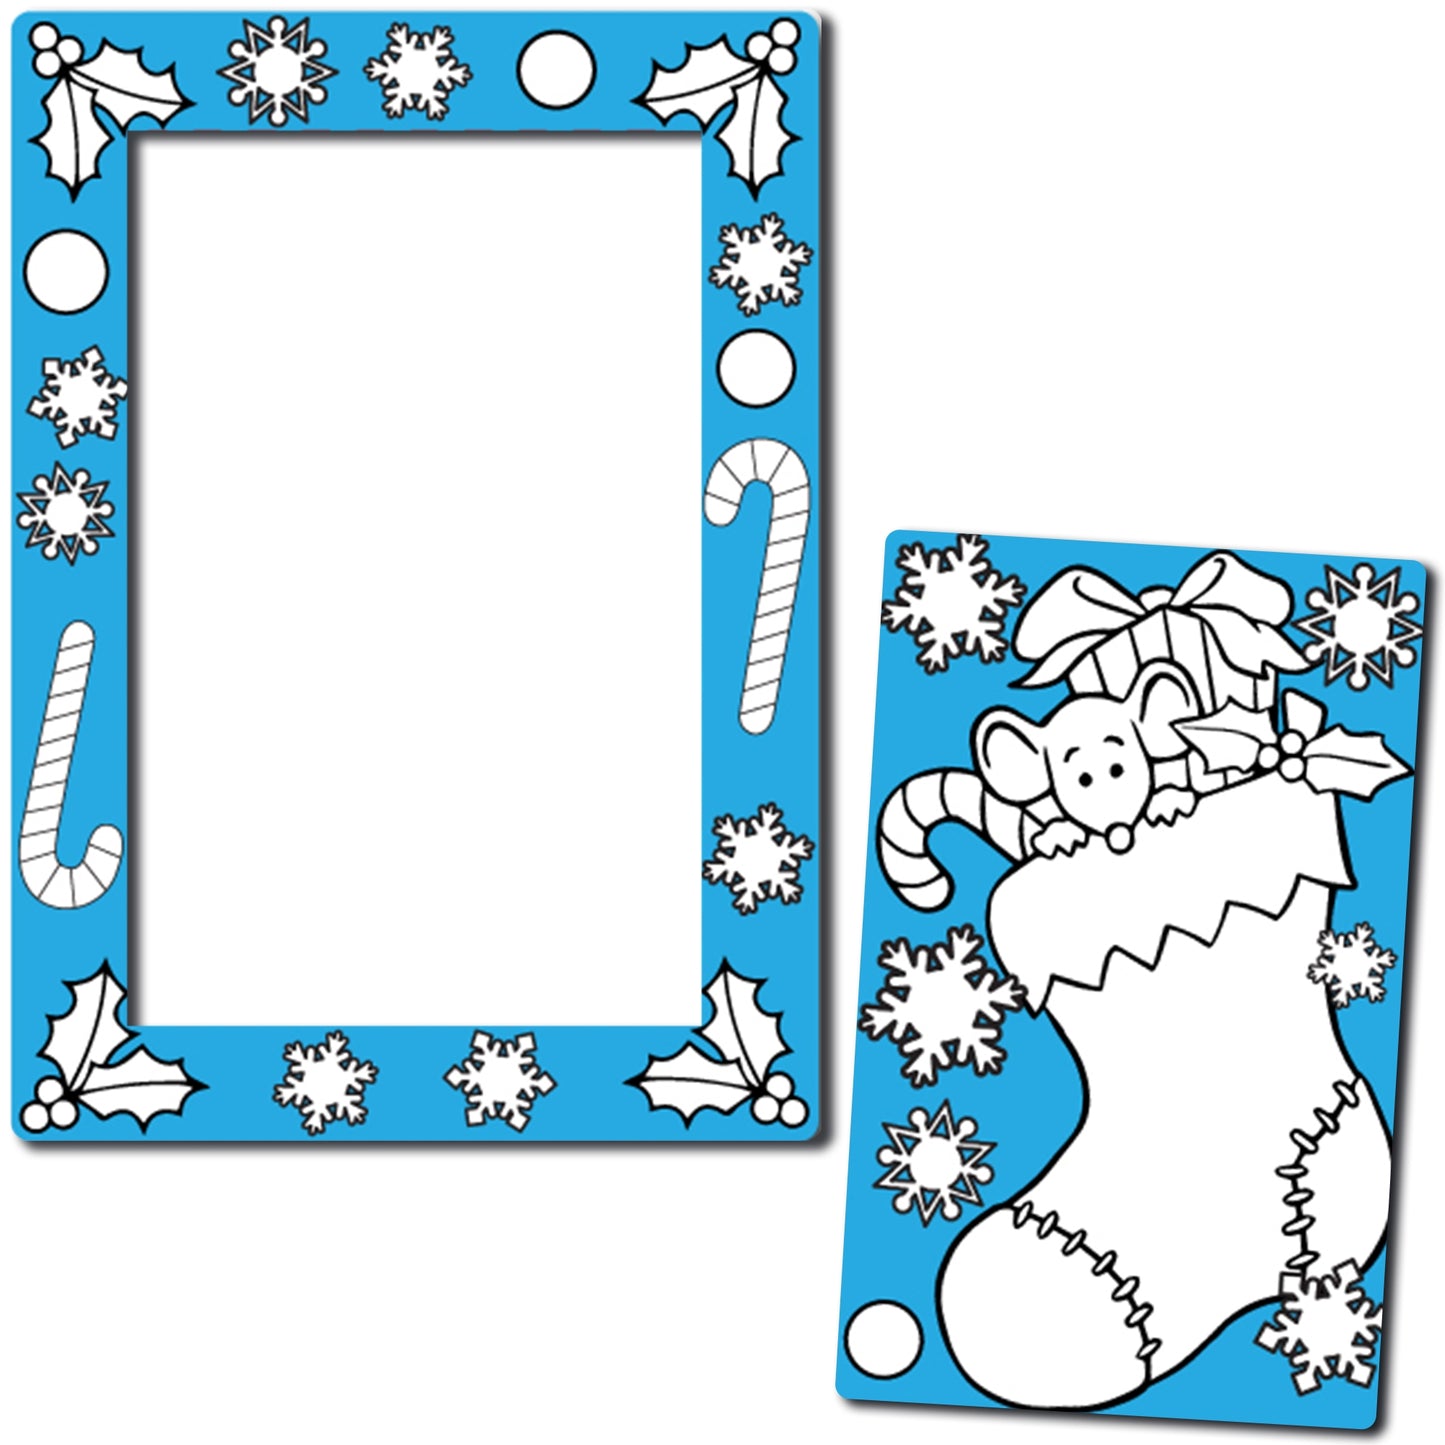 Color In Your Own Christmas Stocking Picture Frame Magnet, DIY, Decorate a Holiday Magnetic Picture Frame - 5 x 7" Frame with a 3.5 x 5.5" Cut-Out Center Magnet